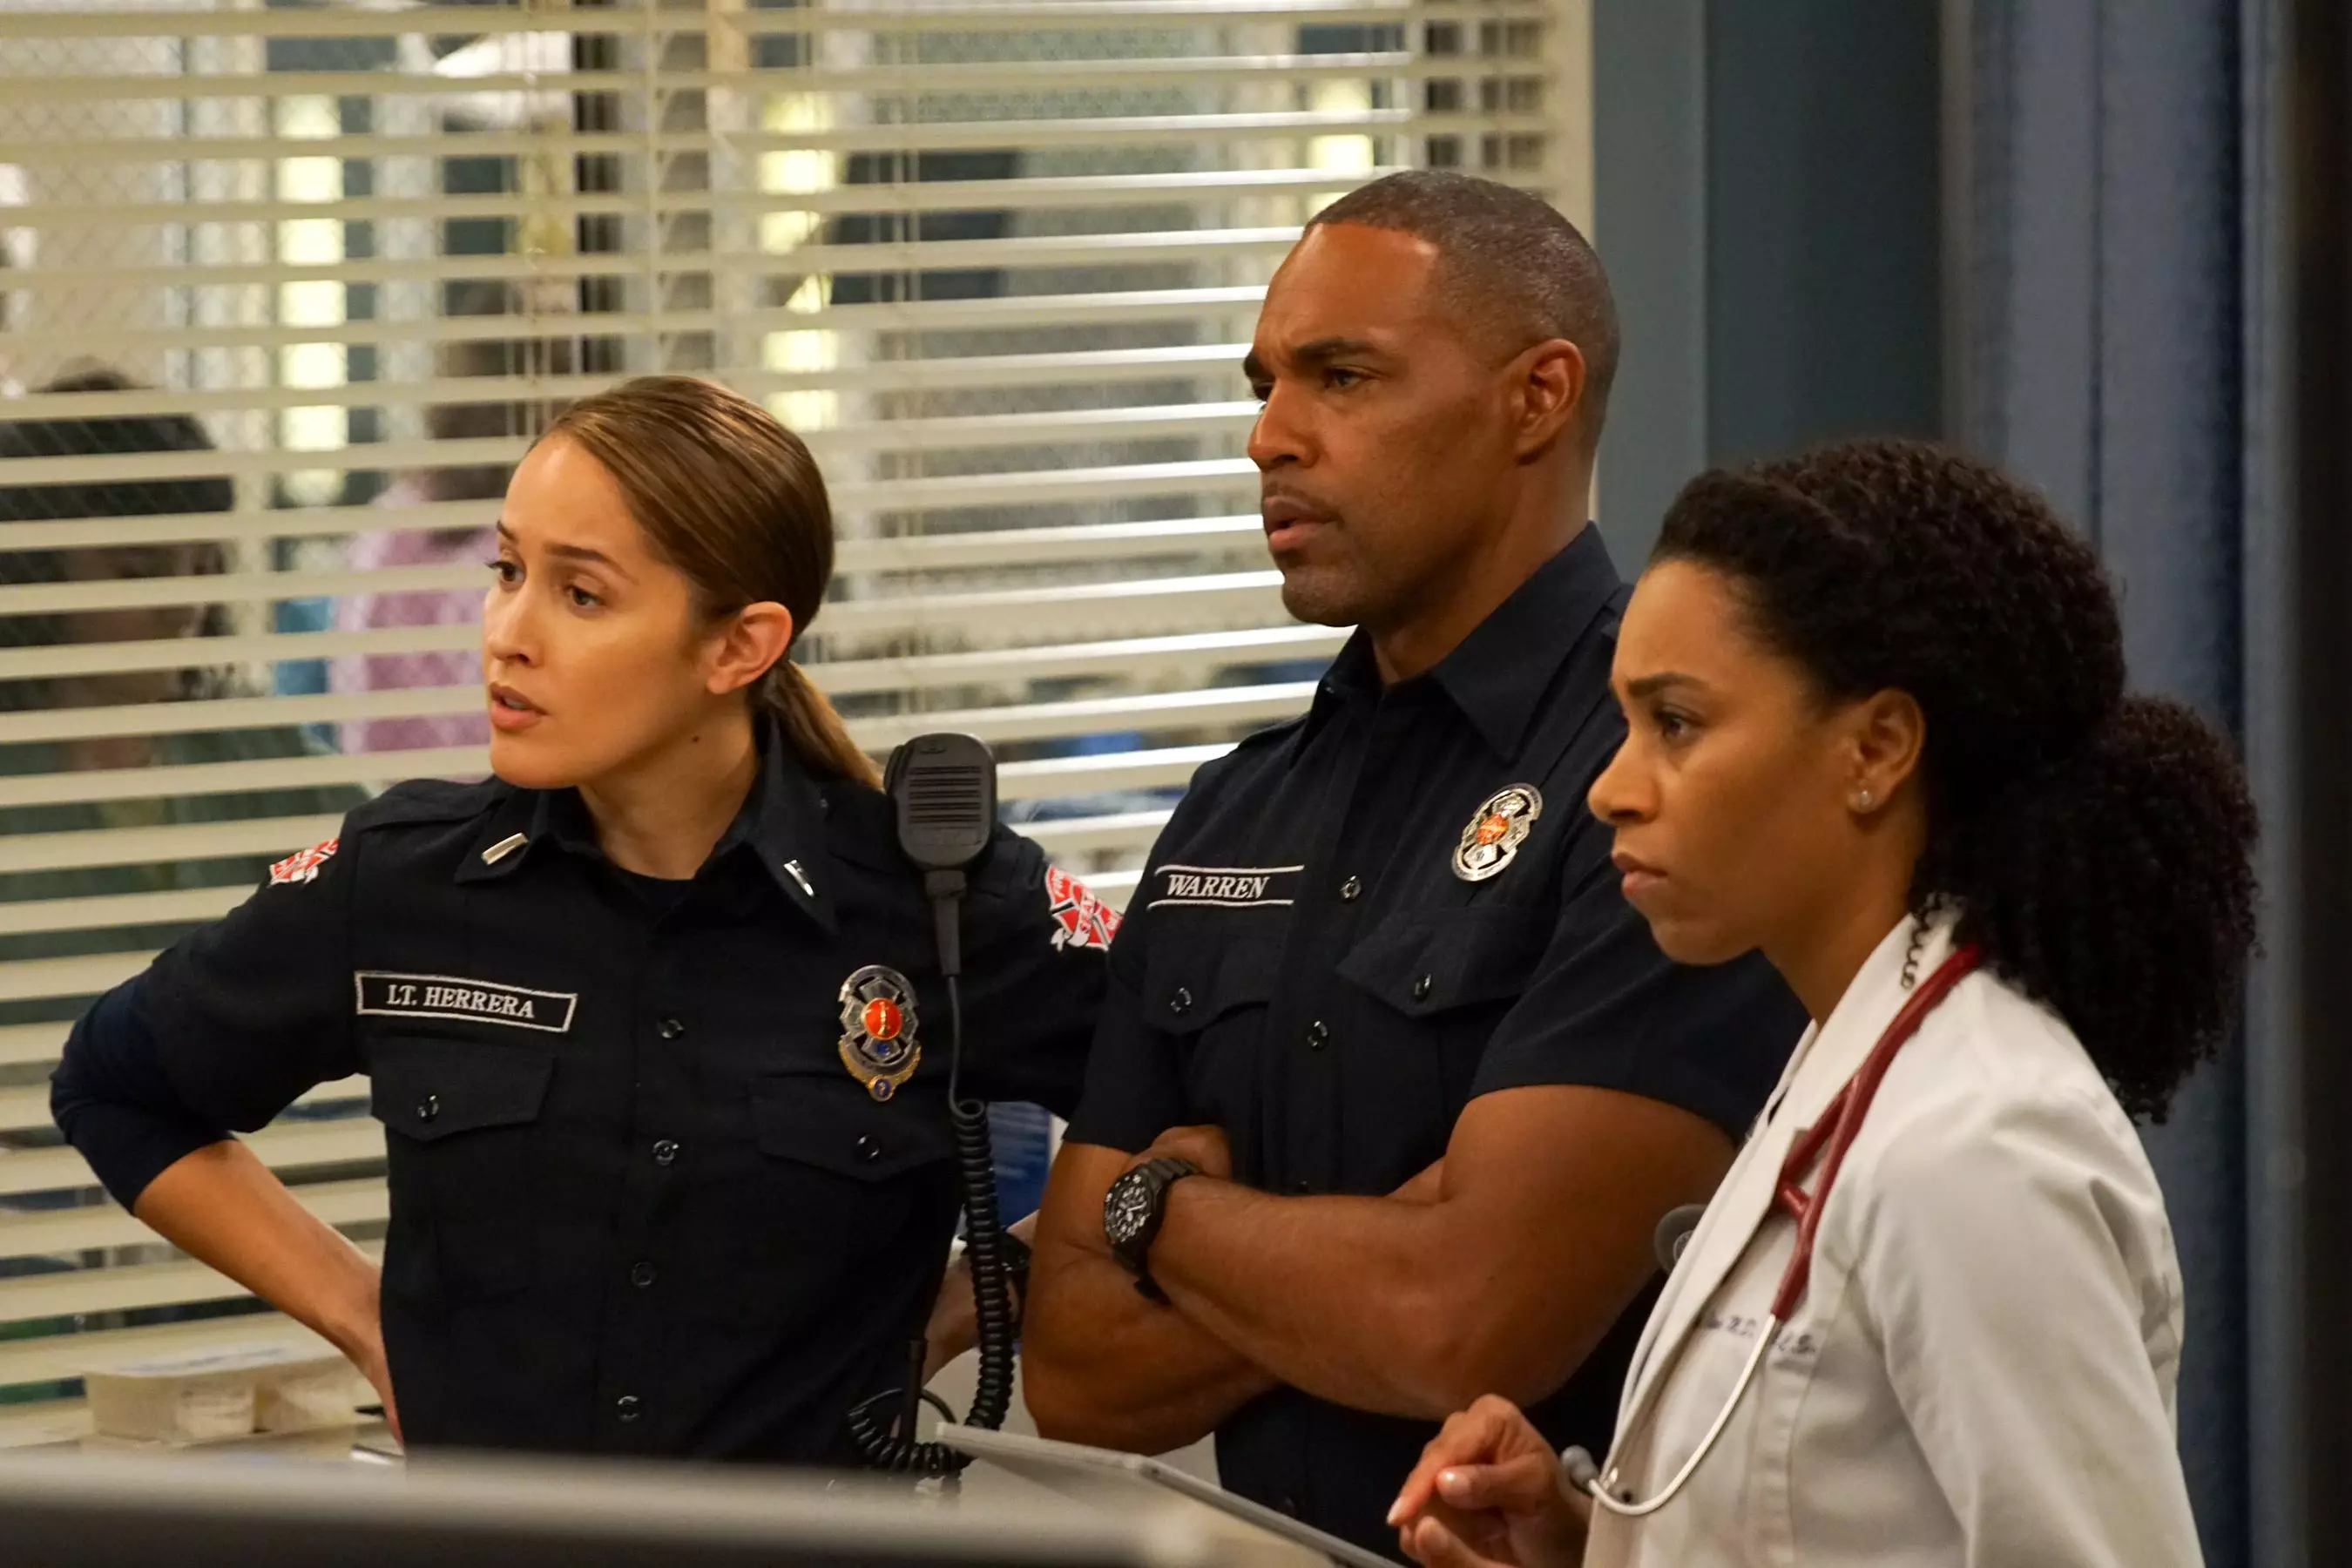 The series already has two spin-offs including Station 19 (